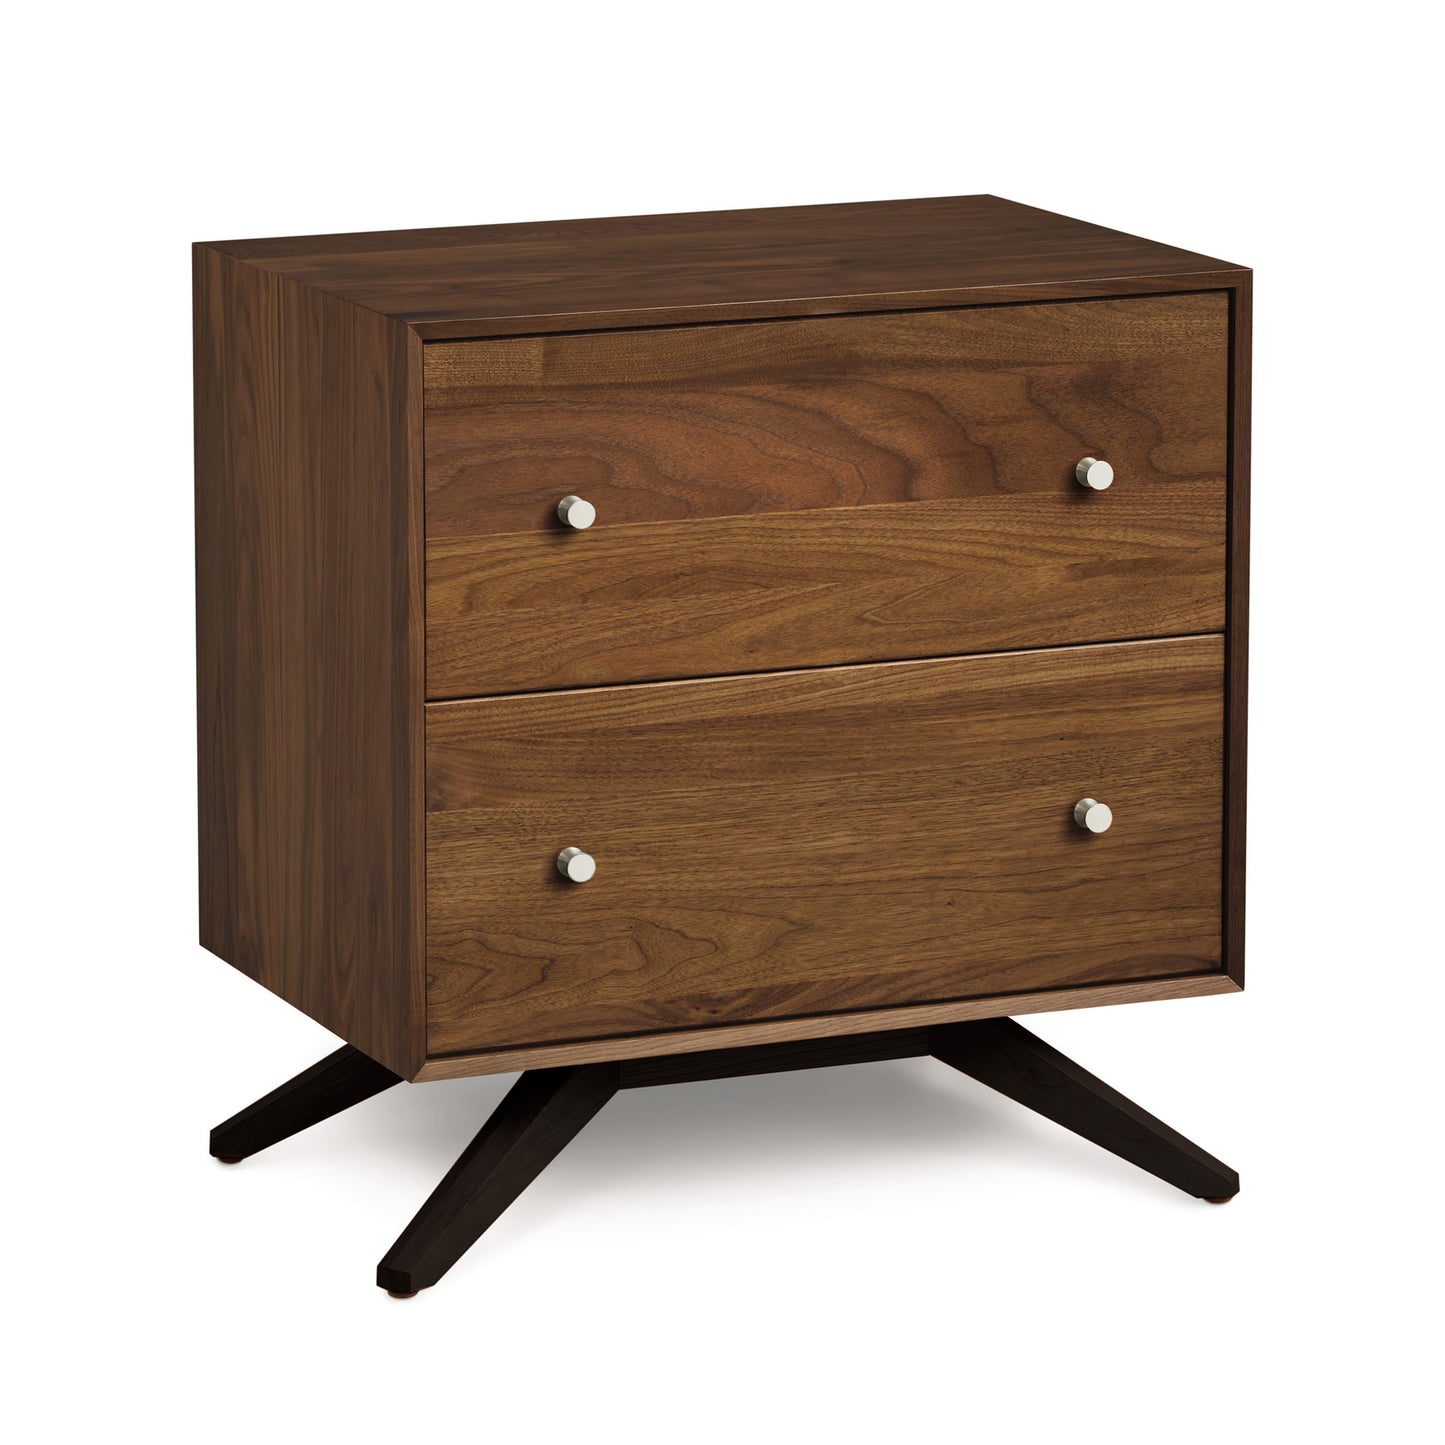 A modern nightstand with two drawers.